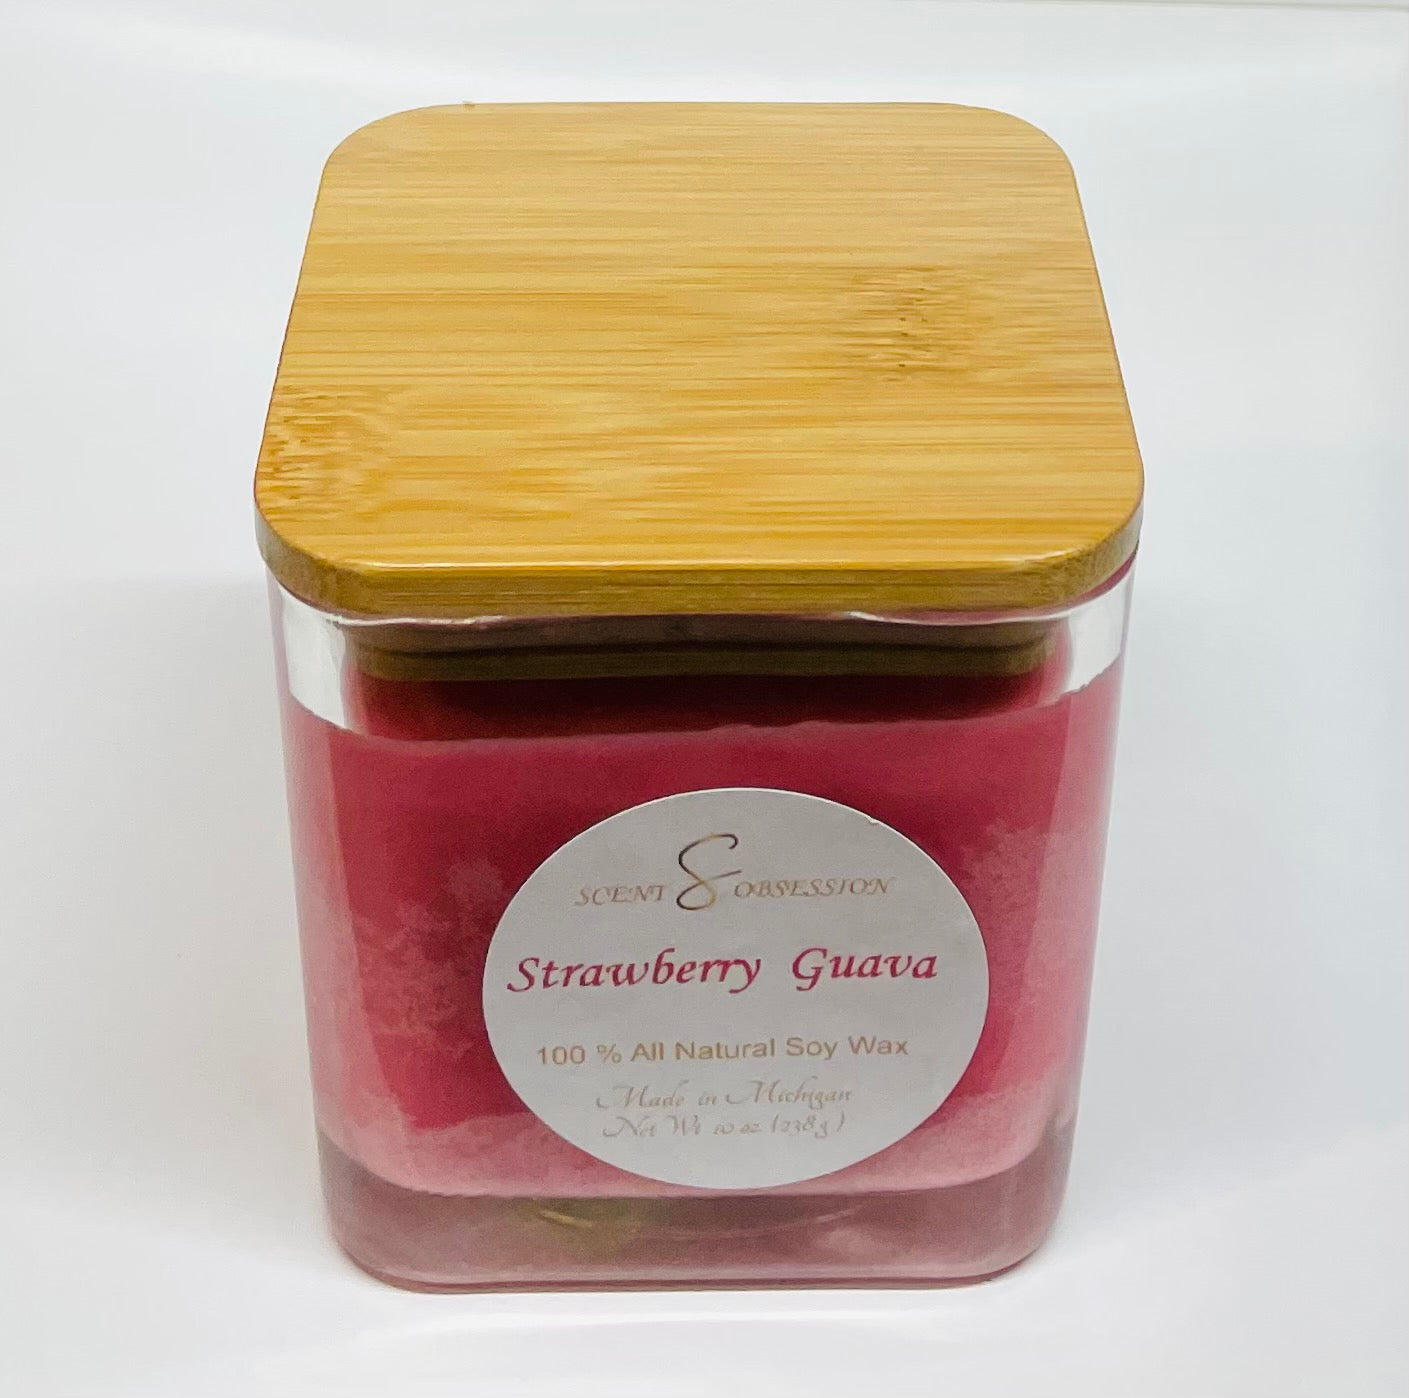 Strawberry Guava - Scent Obsession Candles